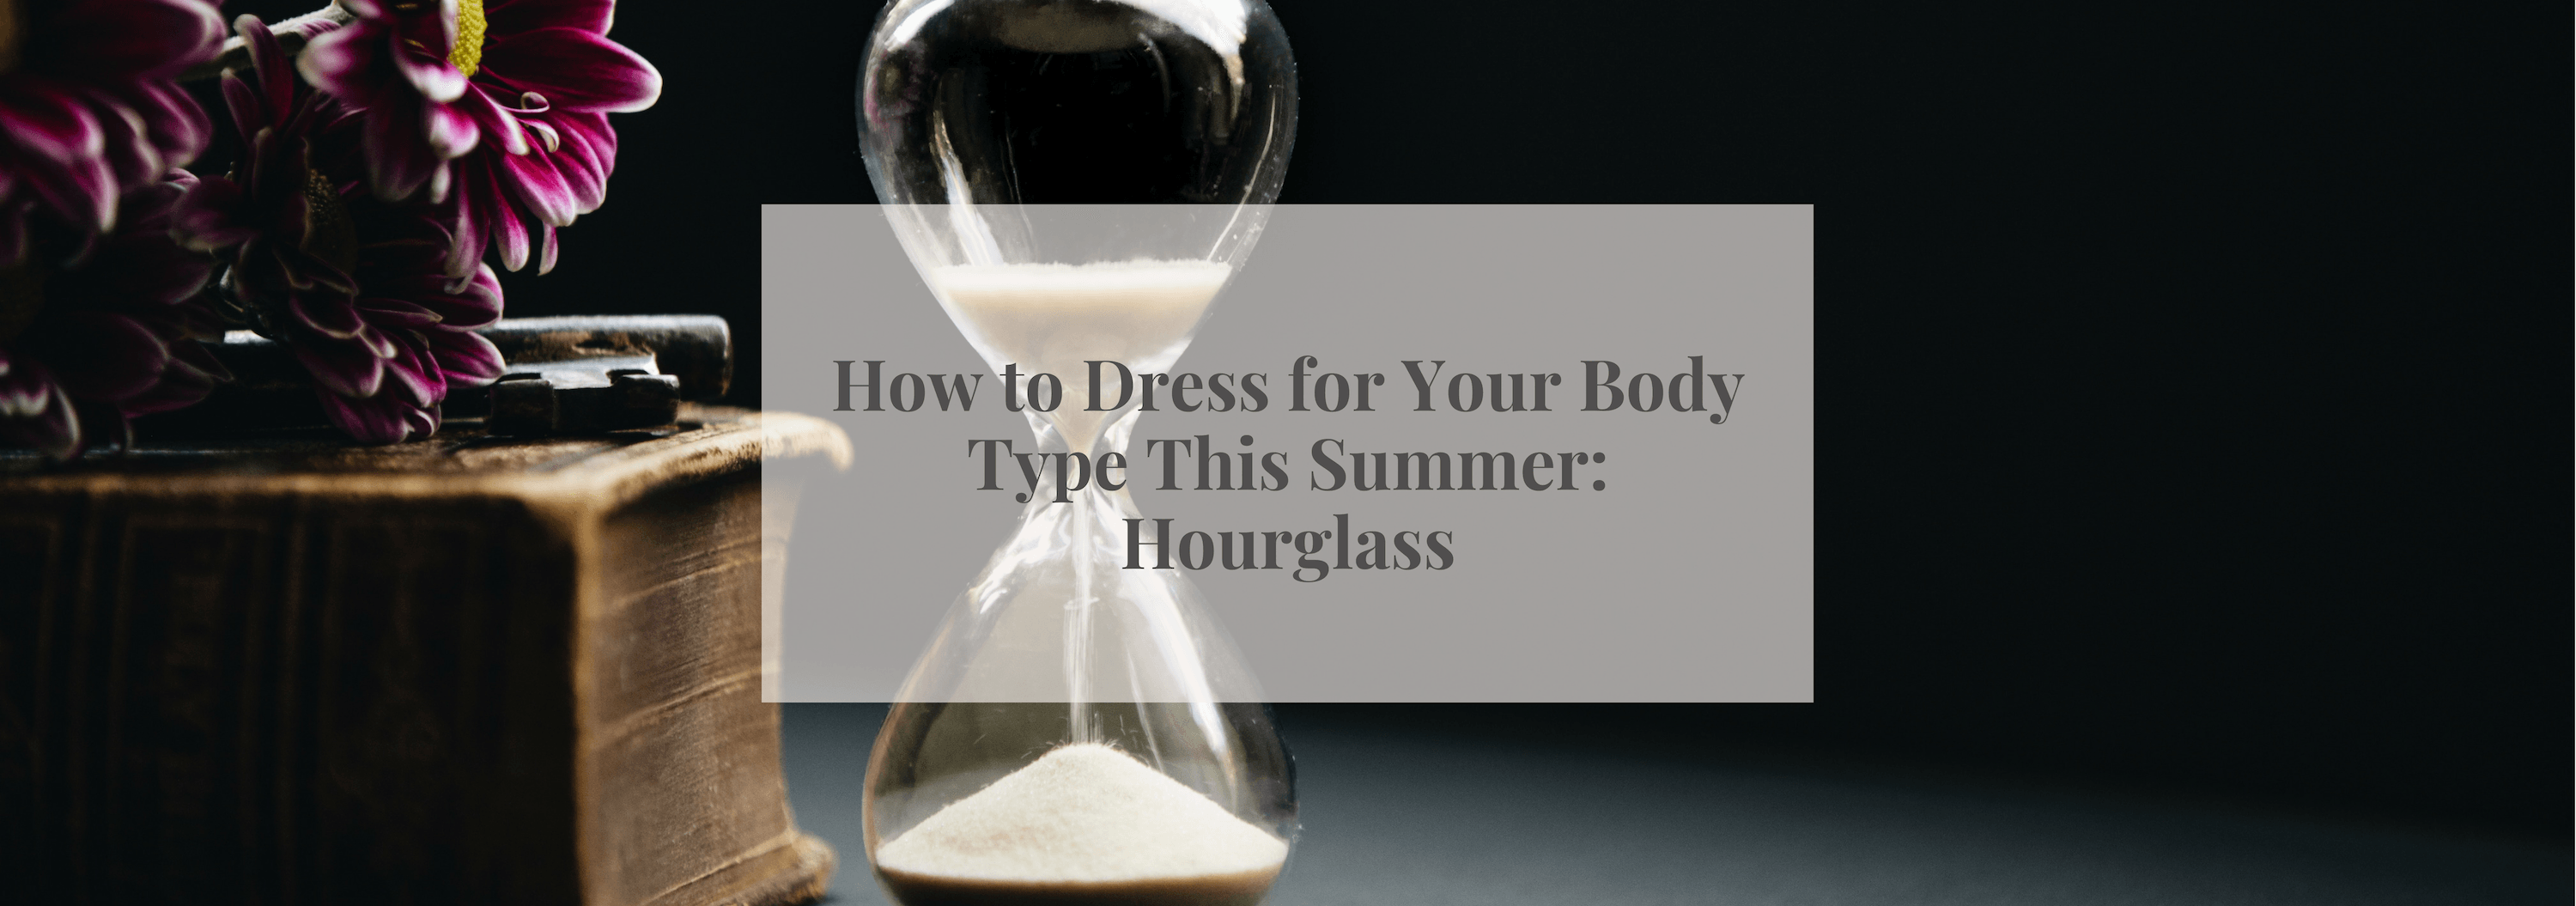 How to Dress for Your Body Type This Summer: Hourglass - Numi